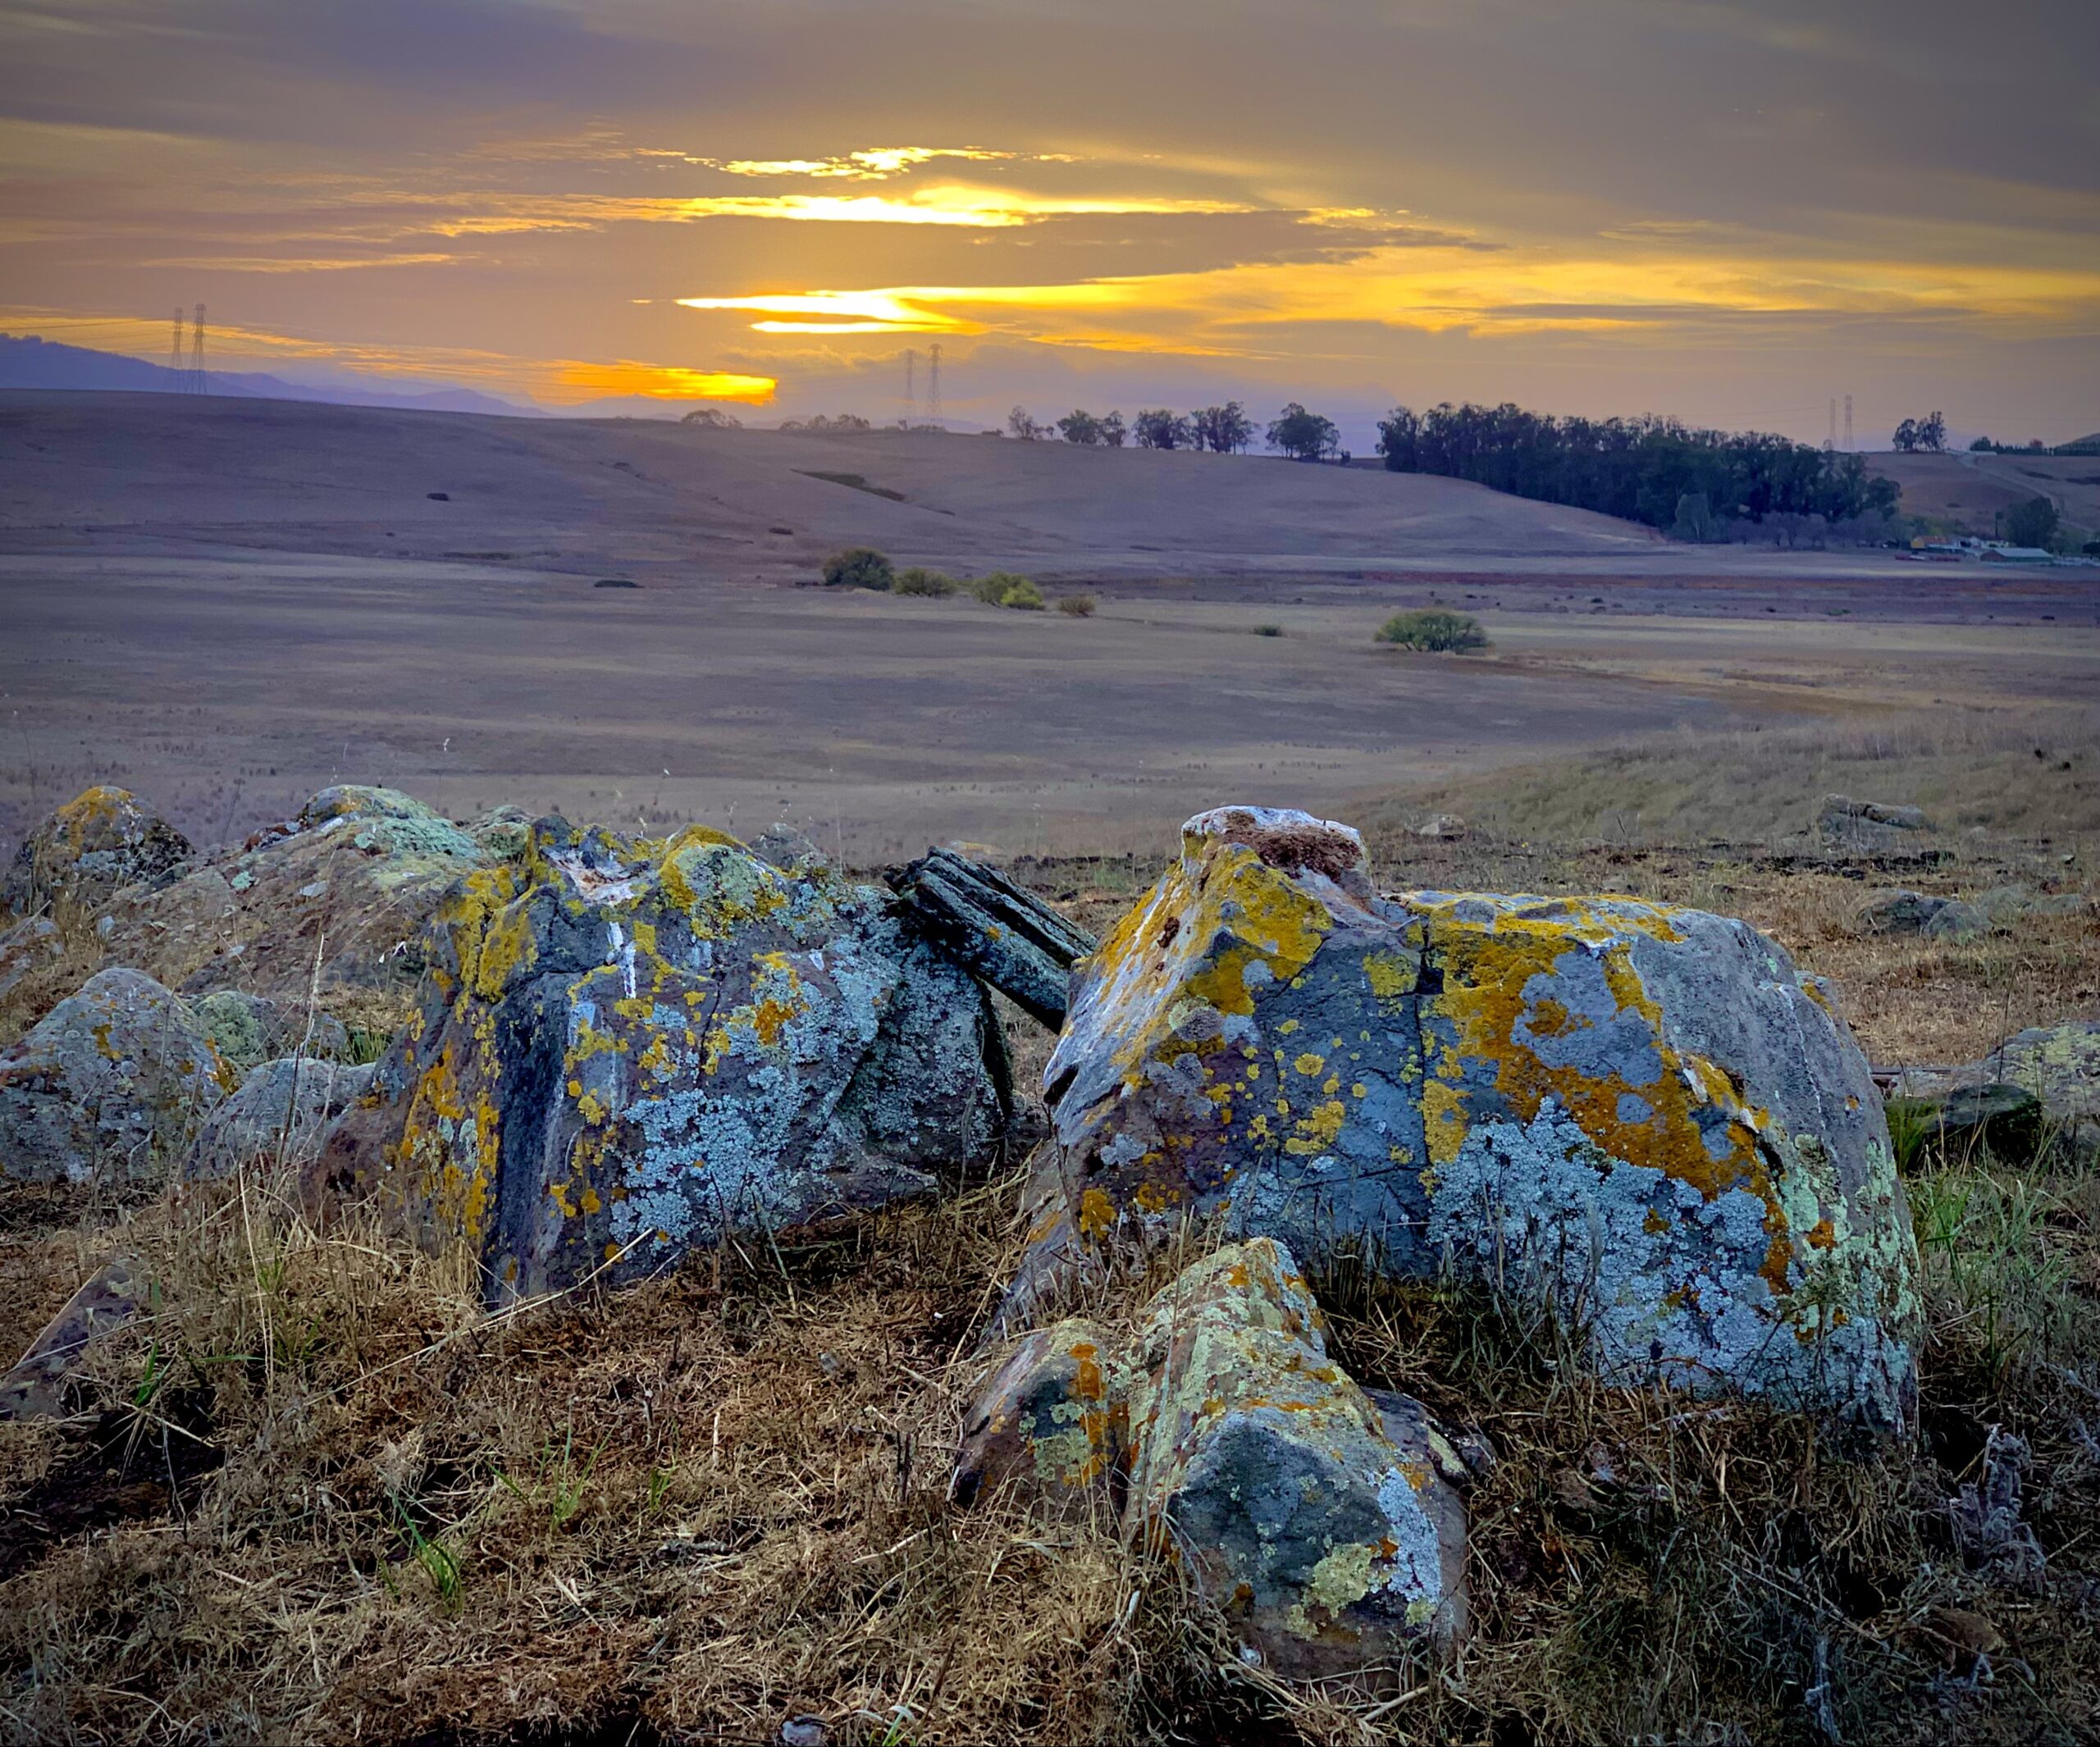 A group of rocks in a field at sunset.